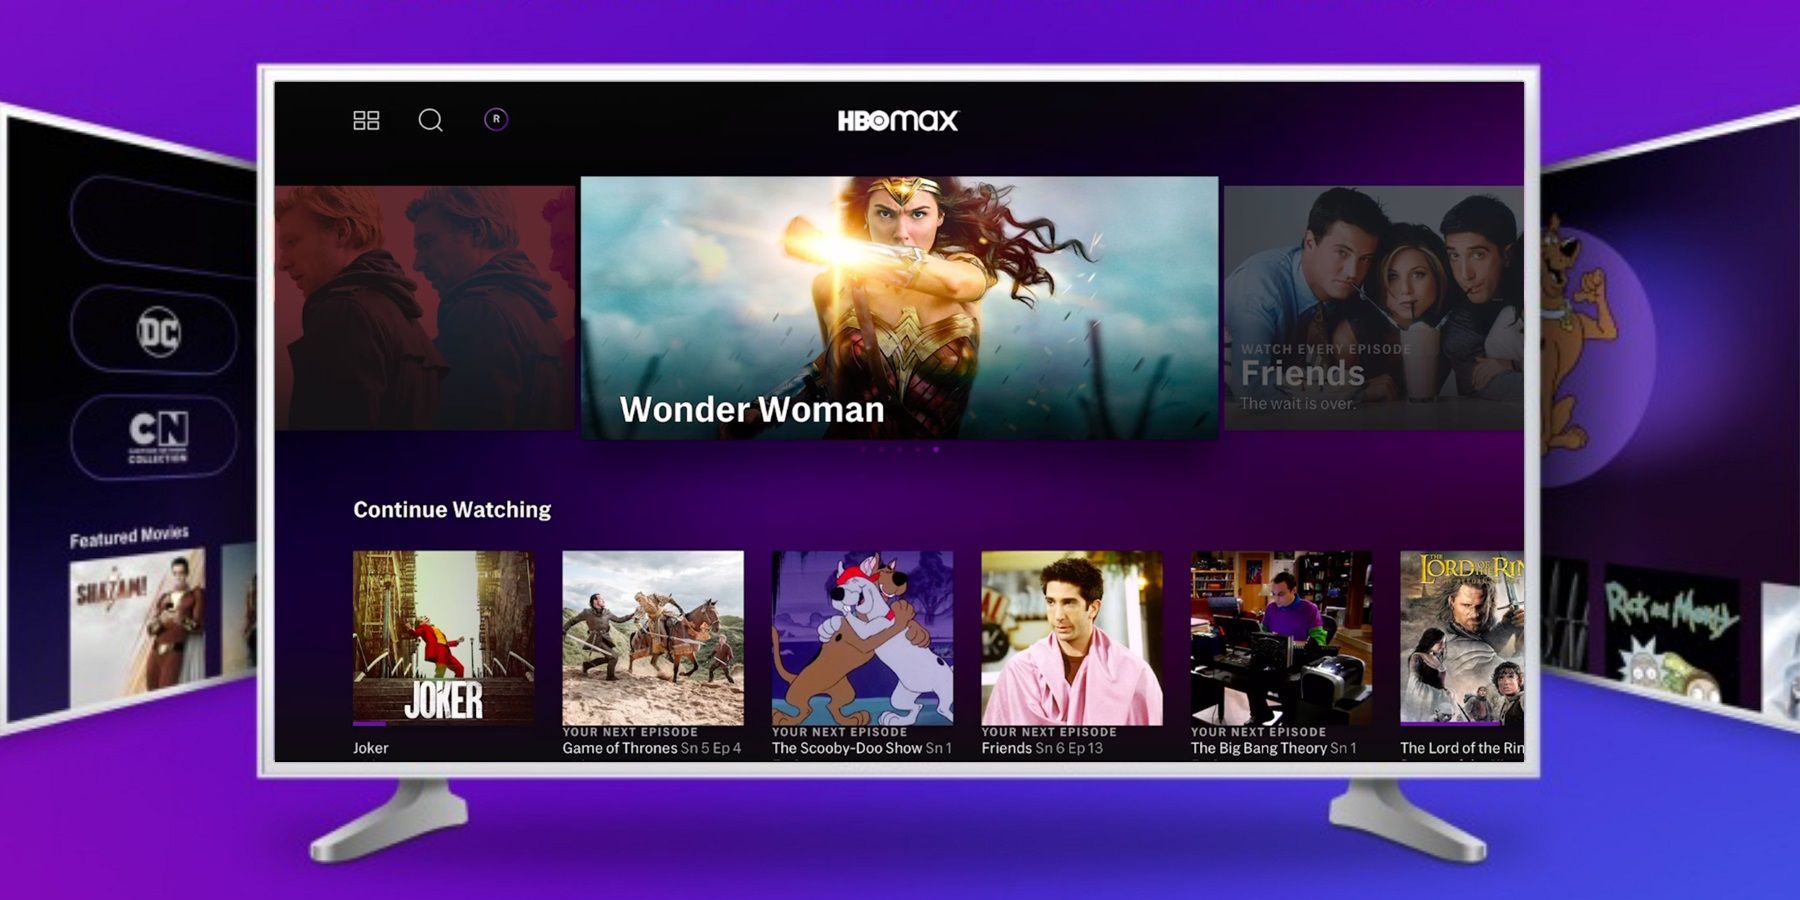 How To Download HBO Max On Samsung Smart TVs